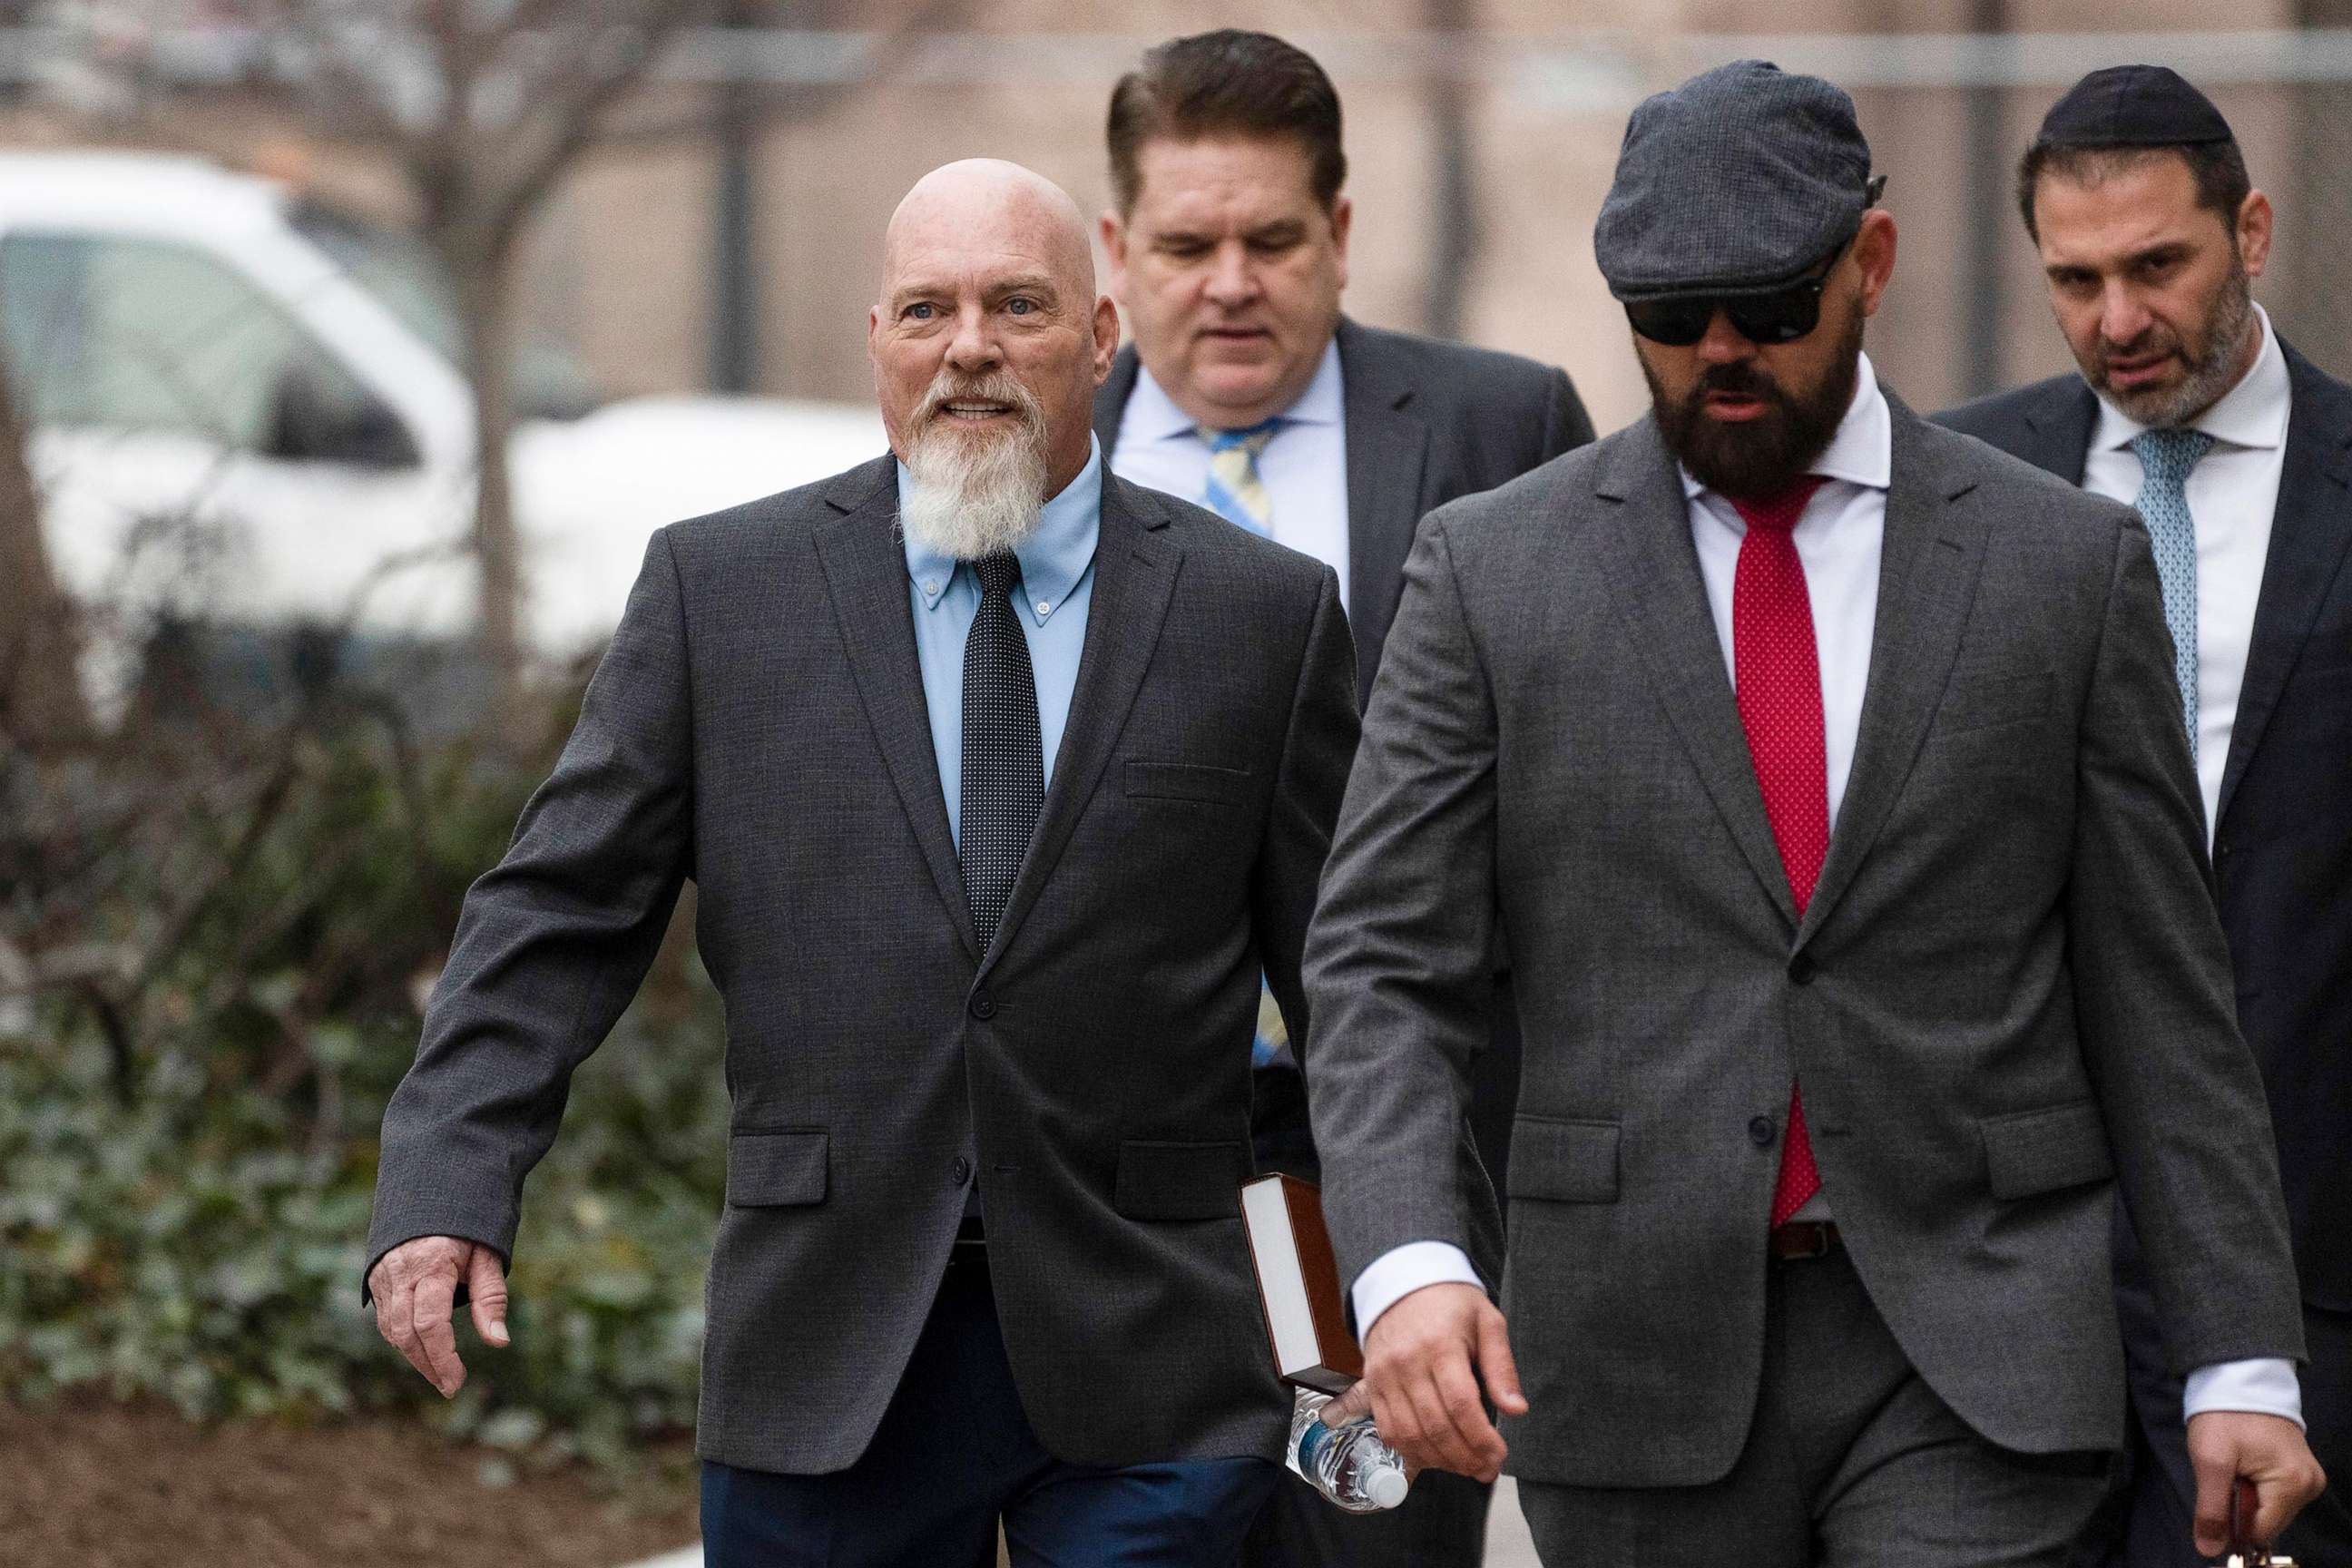 PHOTO: In this Jan. 10, 2023, file photo, Richard Barnett, left, an Arkansas man who was photographed with his feet on a desk in former House Speaker Nancy Pelosi's office during the Jan. 6 U.S. Capitol riot, arrives at federal court in Washington, D.C.,